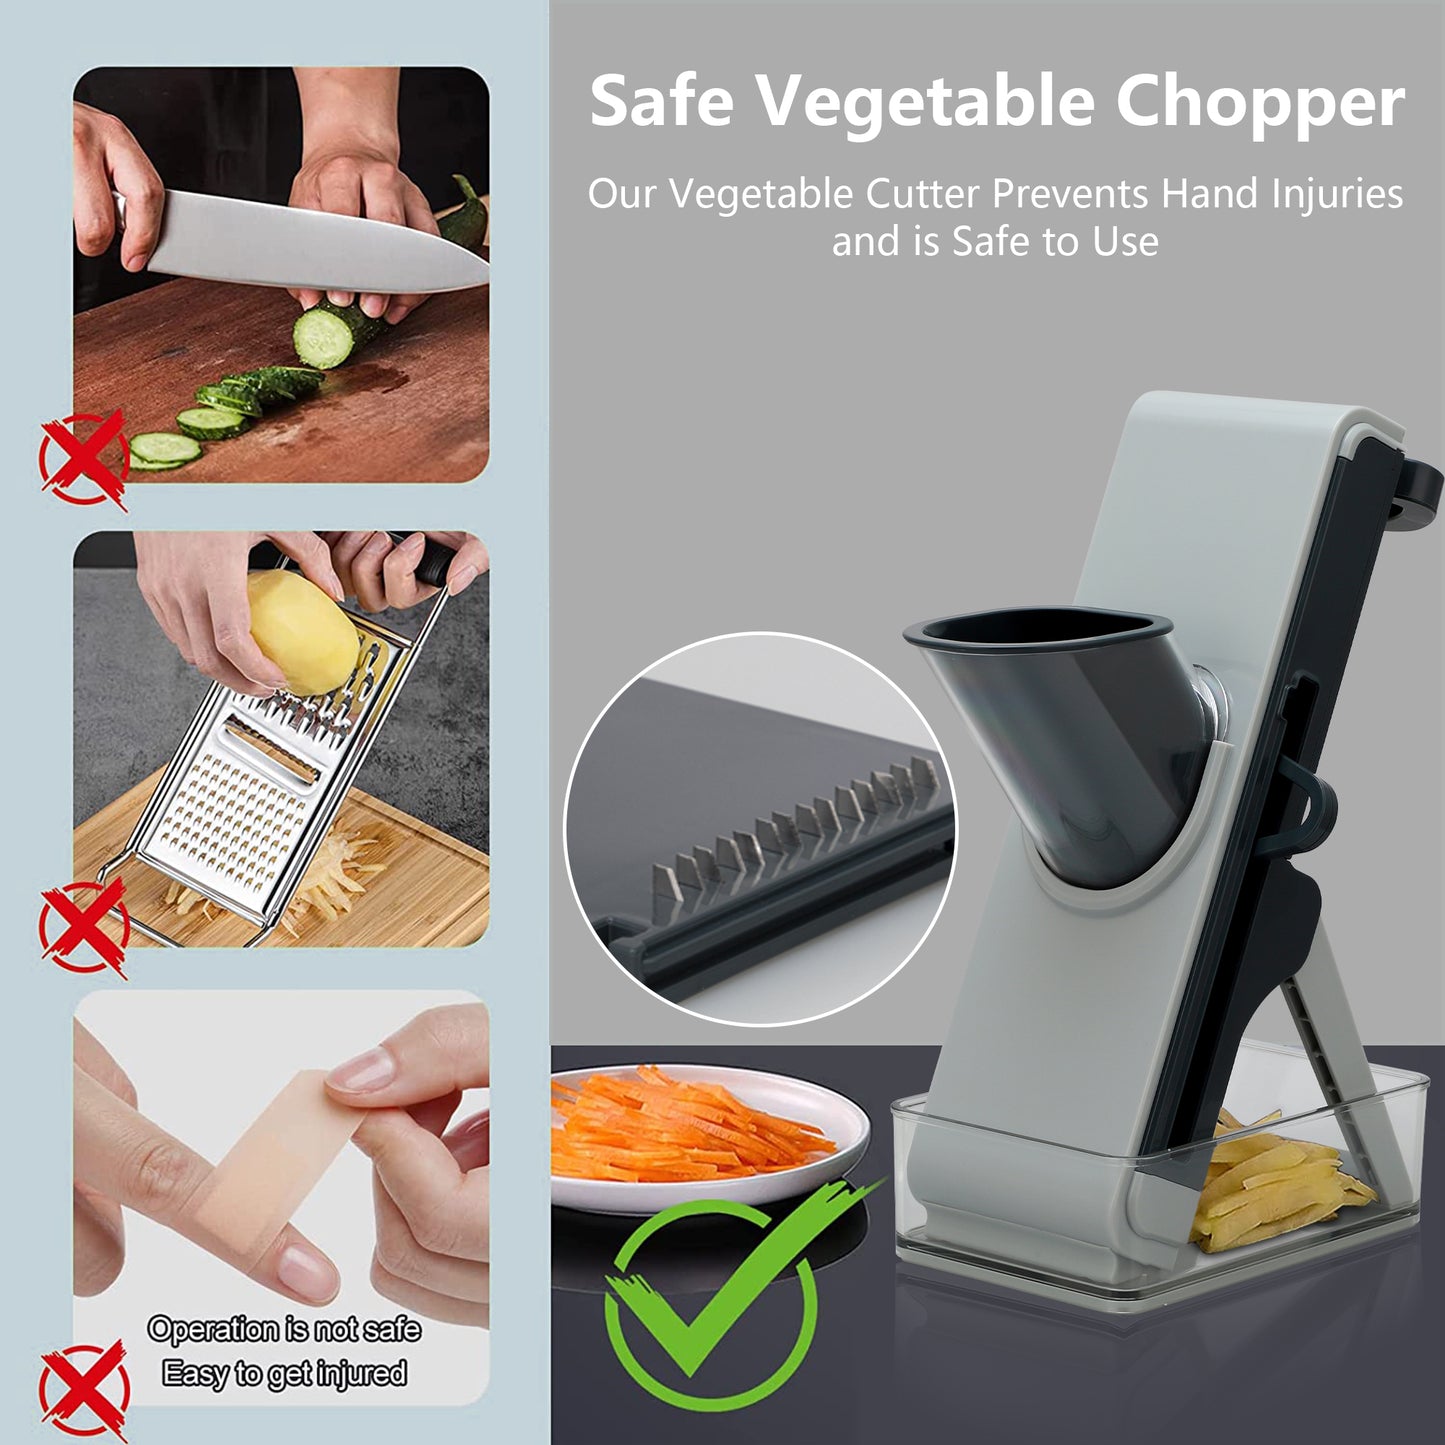 Mandoline Slicer for Kitchen, Chopping Artifact, Vegetable Slicer Cutter, Food Slice and Julienne for Potatoes, Onions, Cucumbers, Carrots, Fruits, Veggie Chopper for Vegetables Meal Prep, Blue